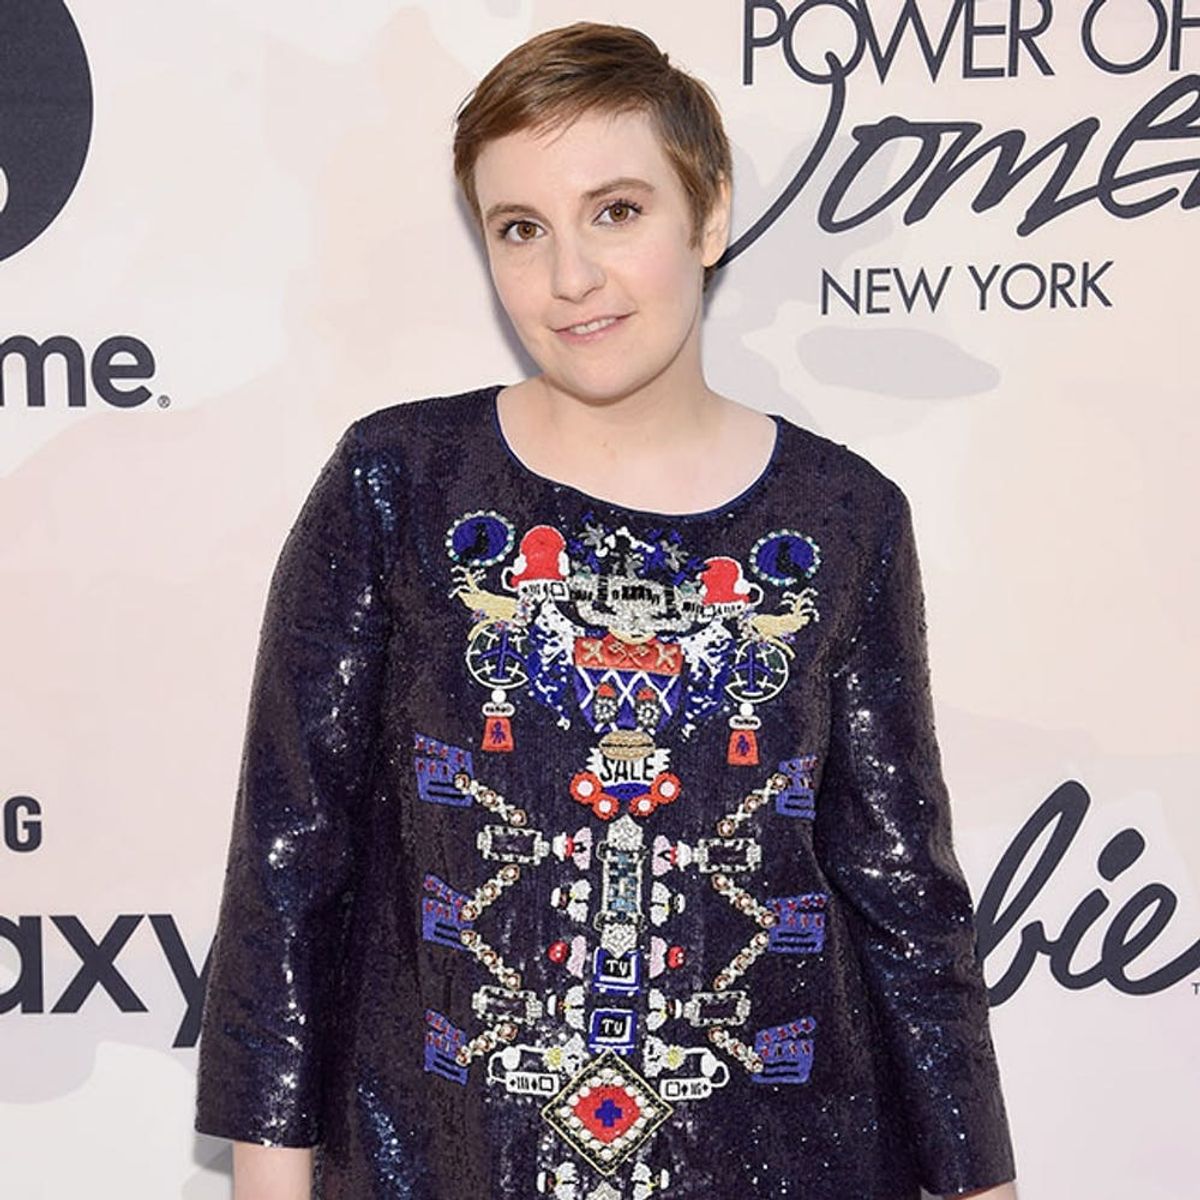 Lena Dunham Is Launching a Newsletter You Need to Know About